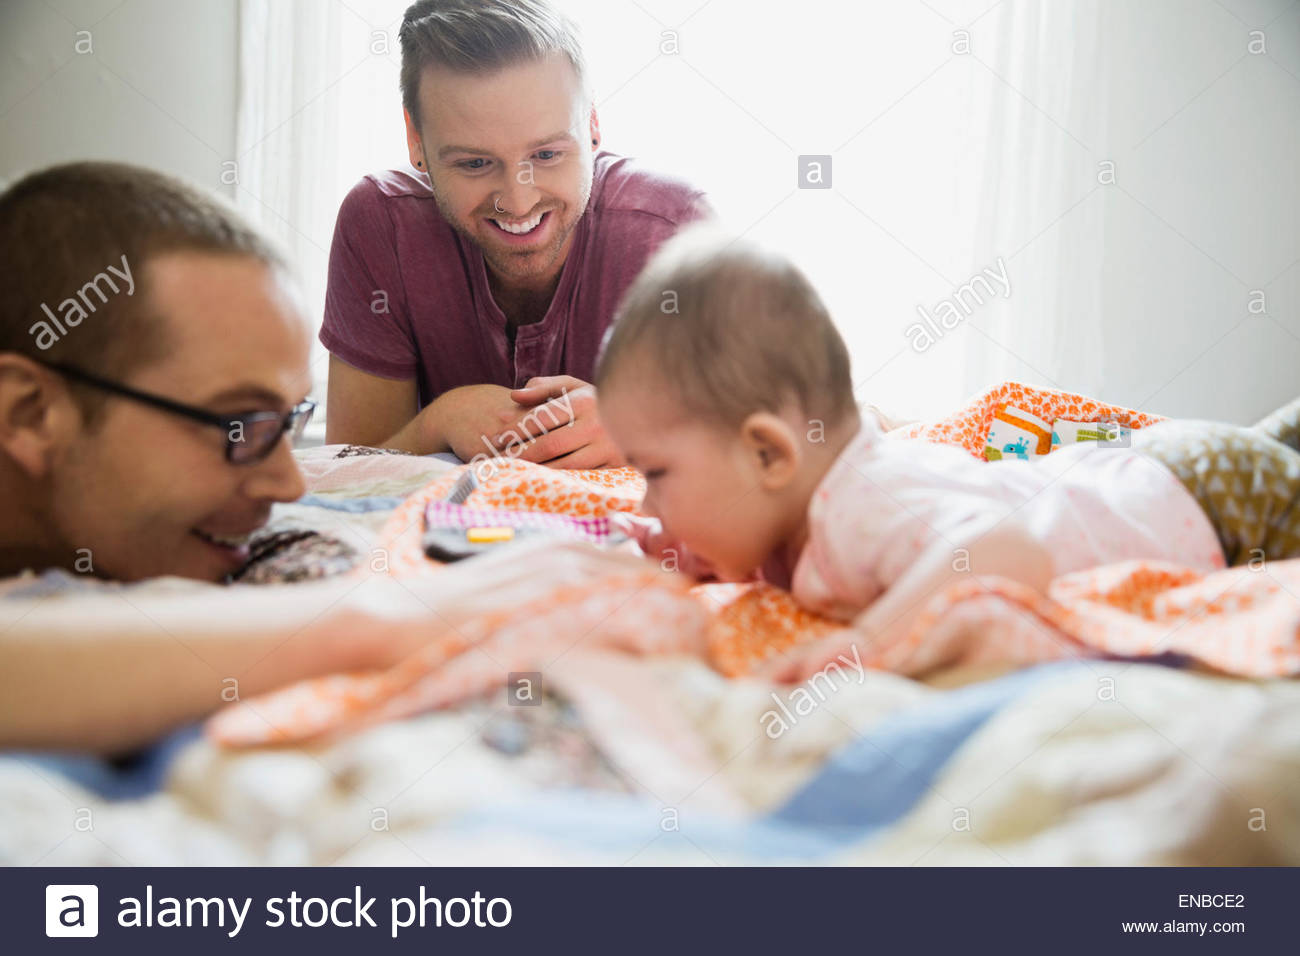 Homosexual couple playing with baby on bed Stock Photo